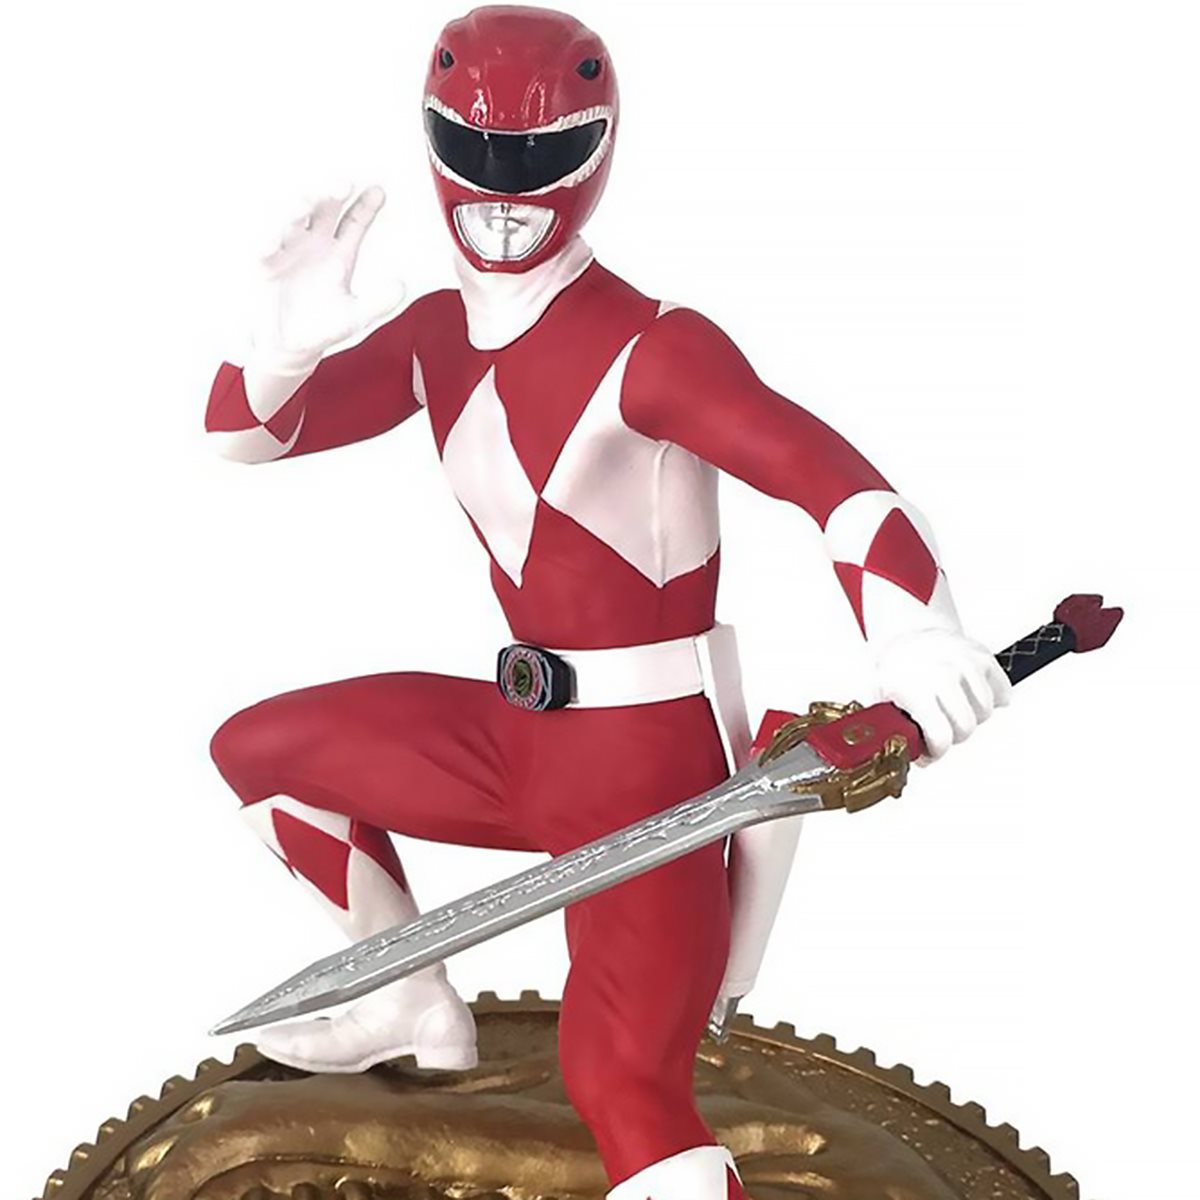 Mighty Morphin Power Rangers Red Ranger 1 8 Scale Statue